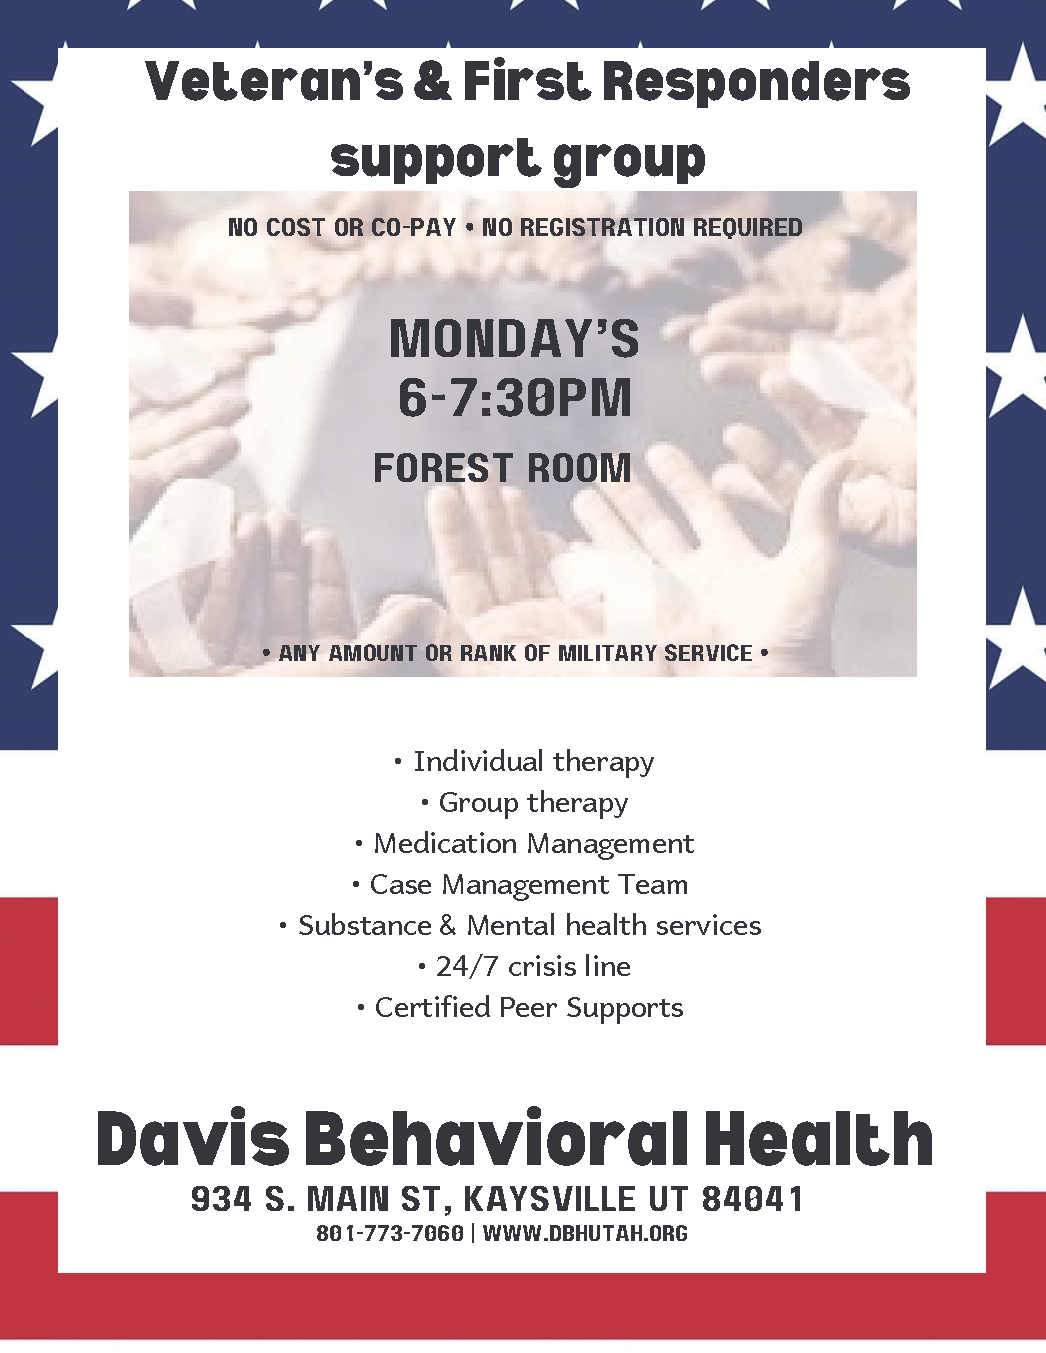 Veterans and First Responders Support Group Flyer